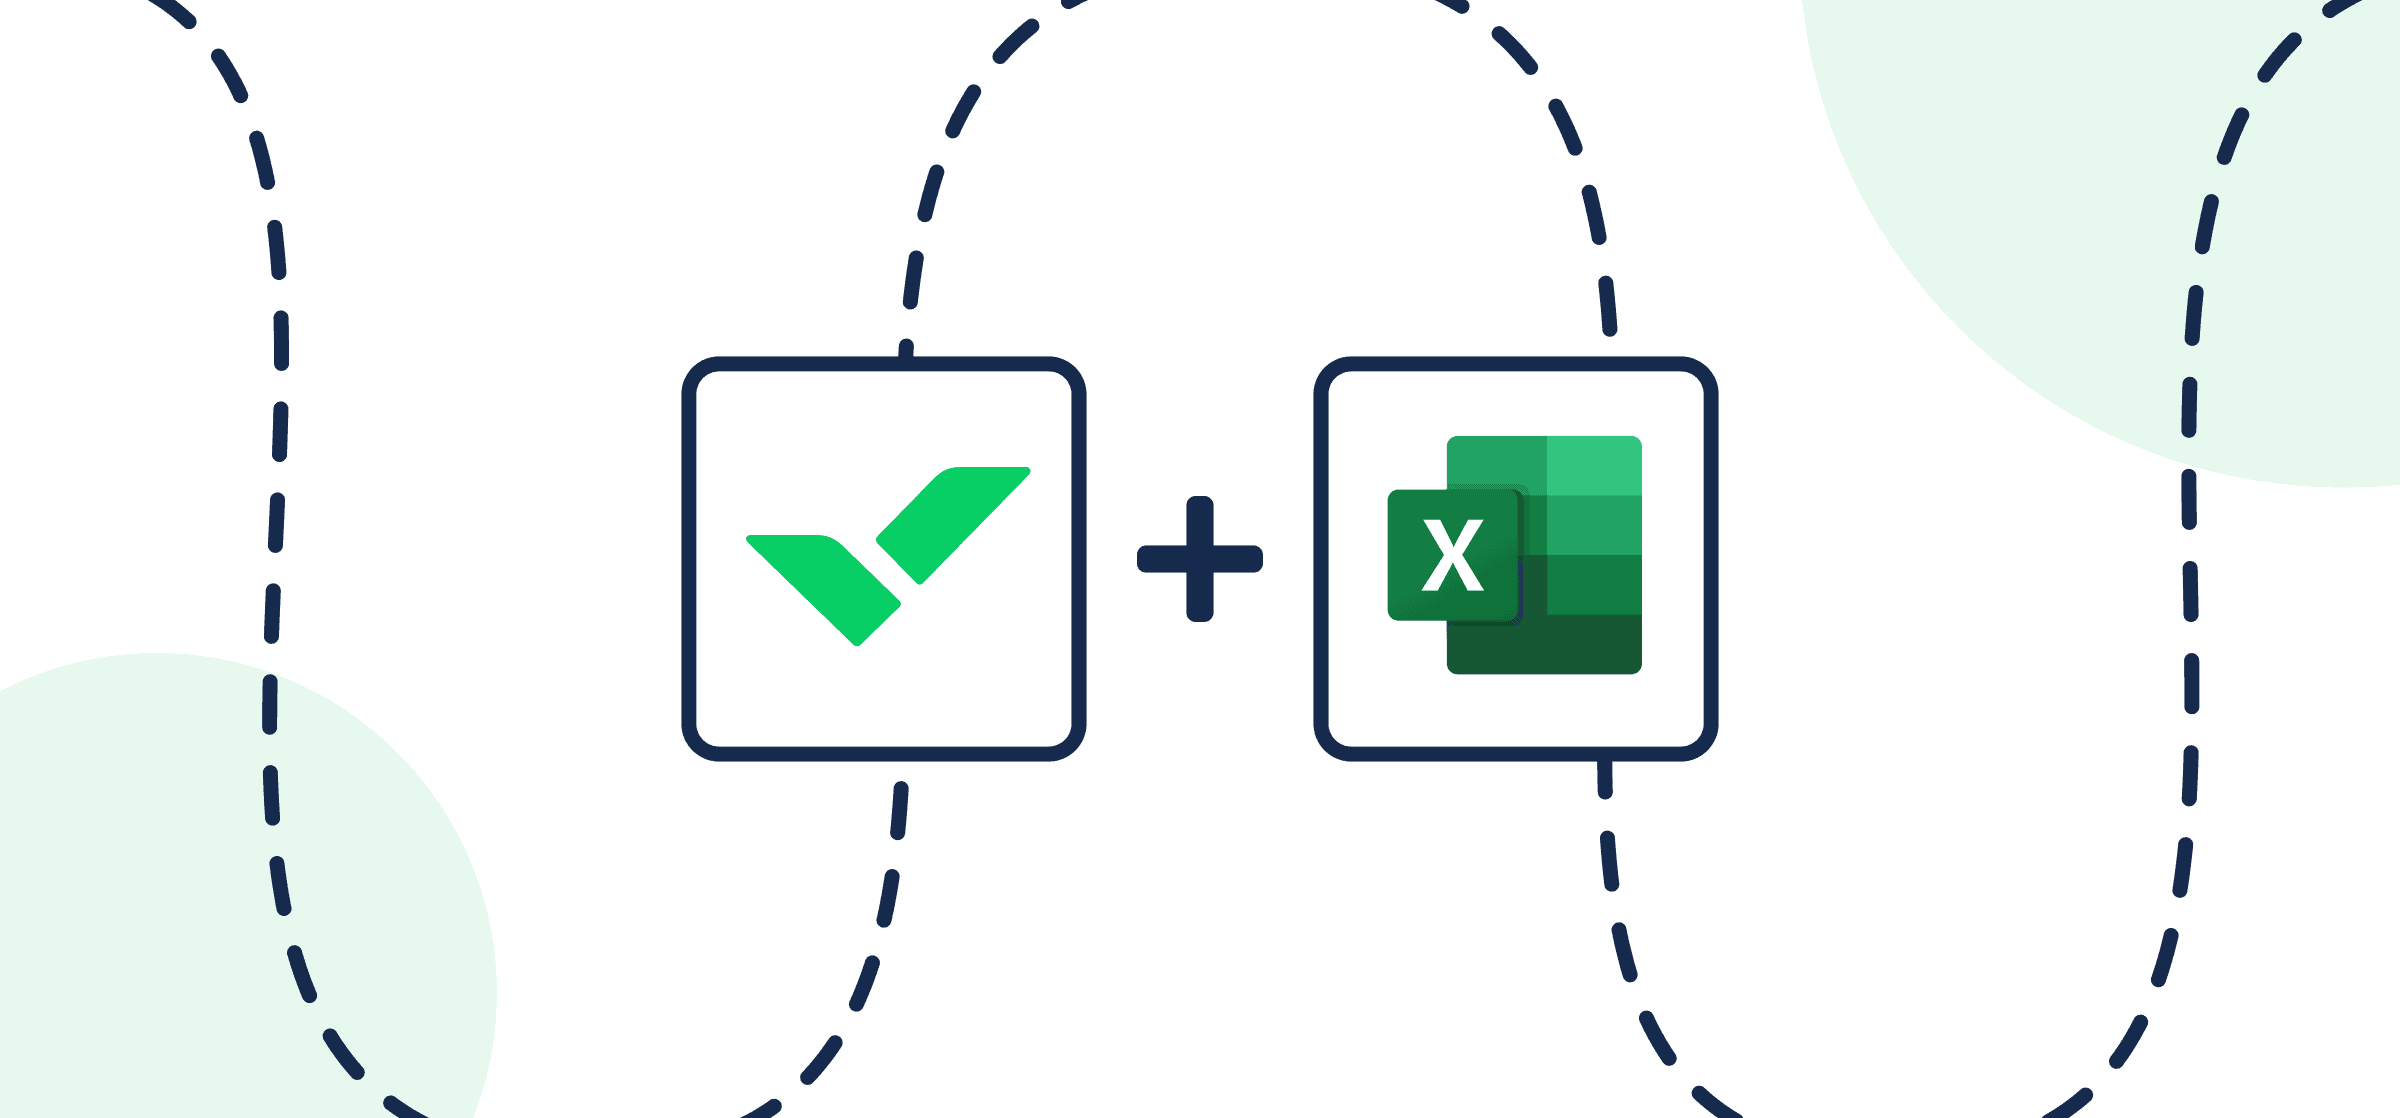 Featured image displaying the logos of Microsoft Excel and Wrike in Unito's guide to setting up a simple Two-Way Sync.